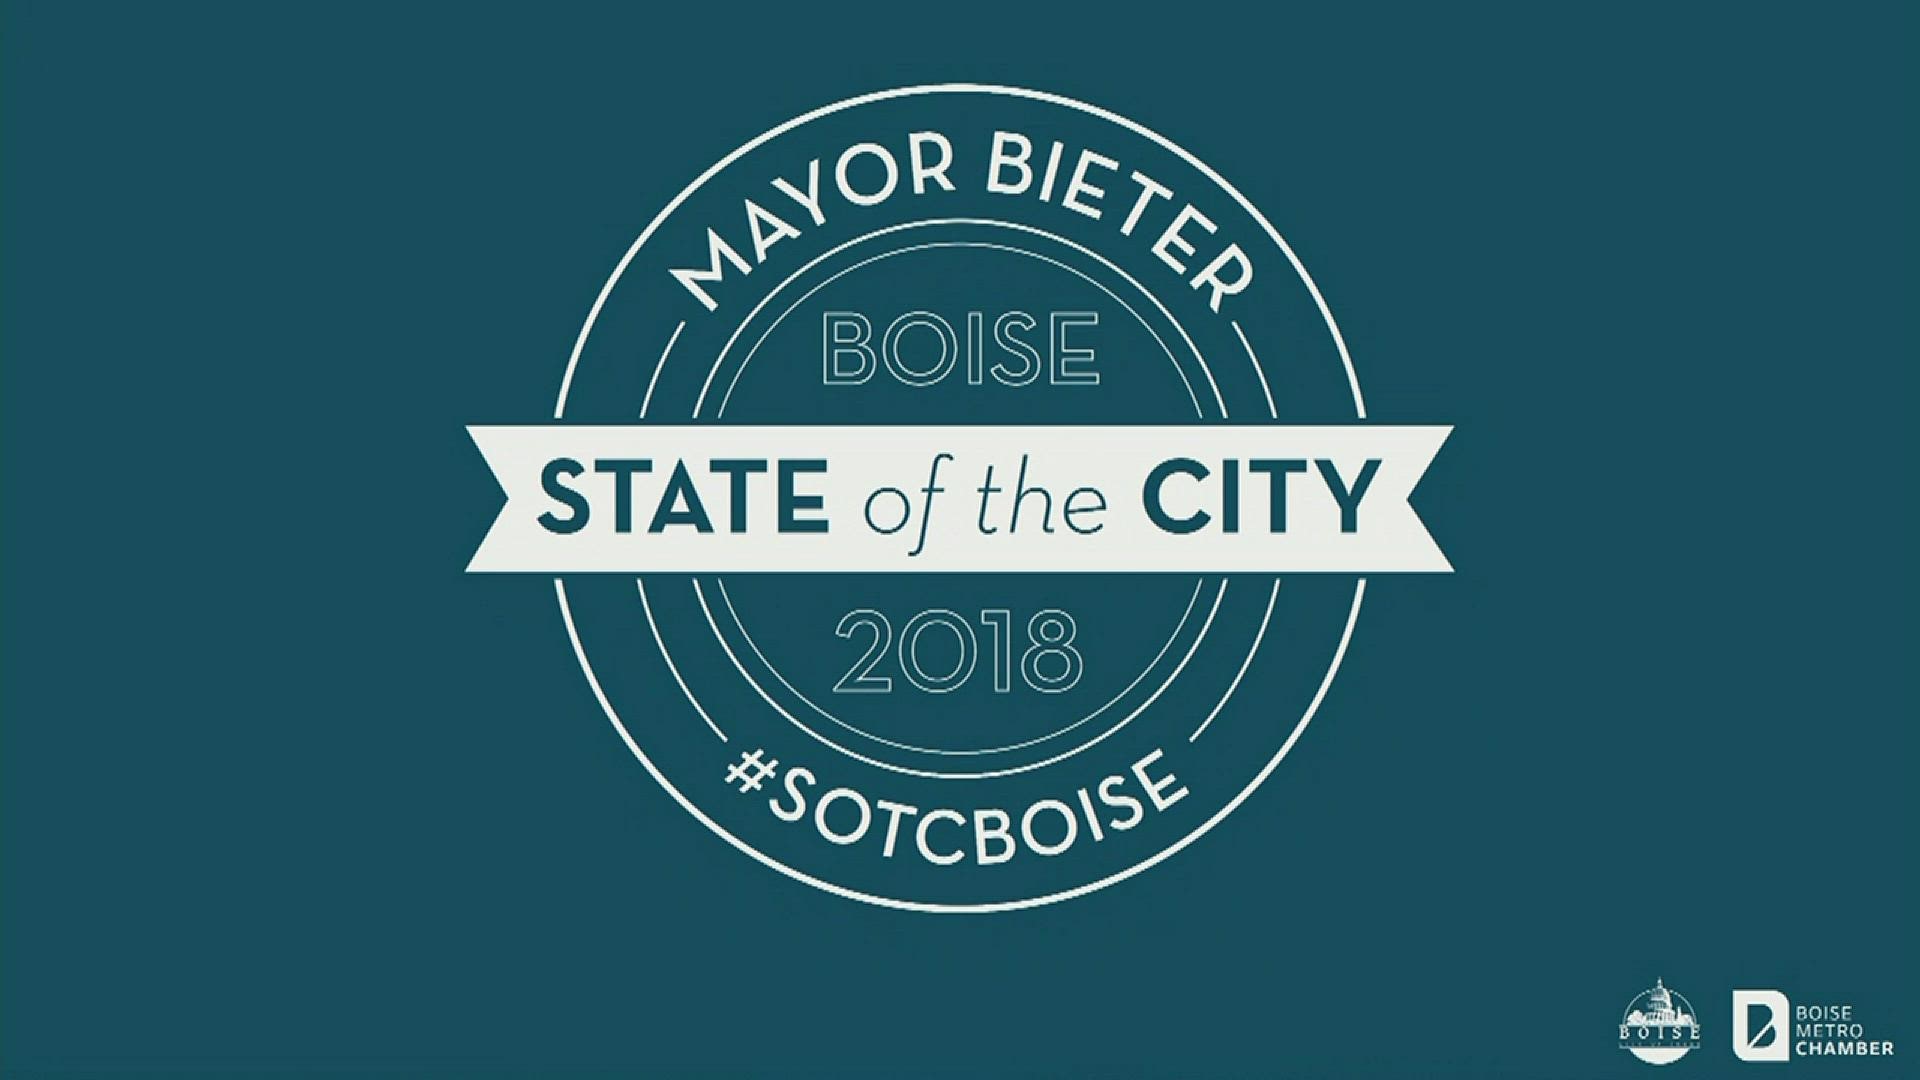 In his speech on September 12, 2018, at the Morrison Center, Mayor Dave Bieter touched on several topics, including public transportation, affordable housing, funding public schools and the much talked about downtown sports stadium